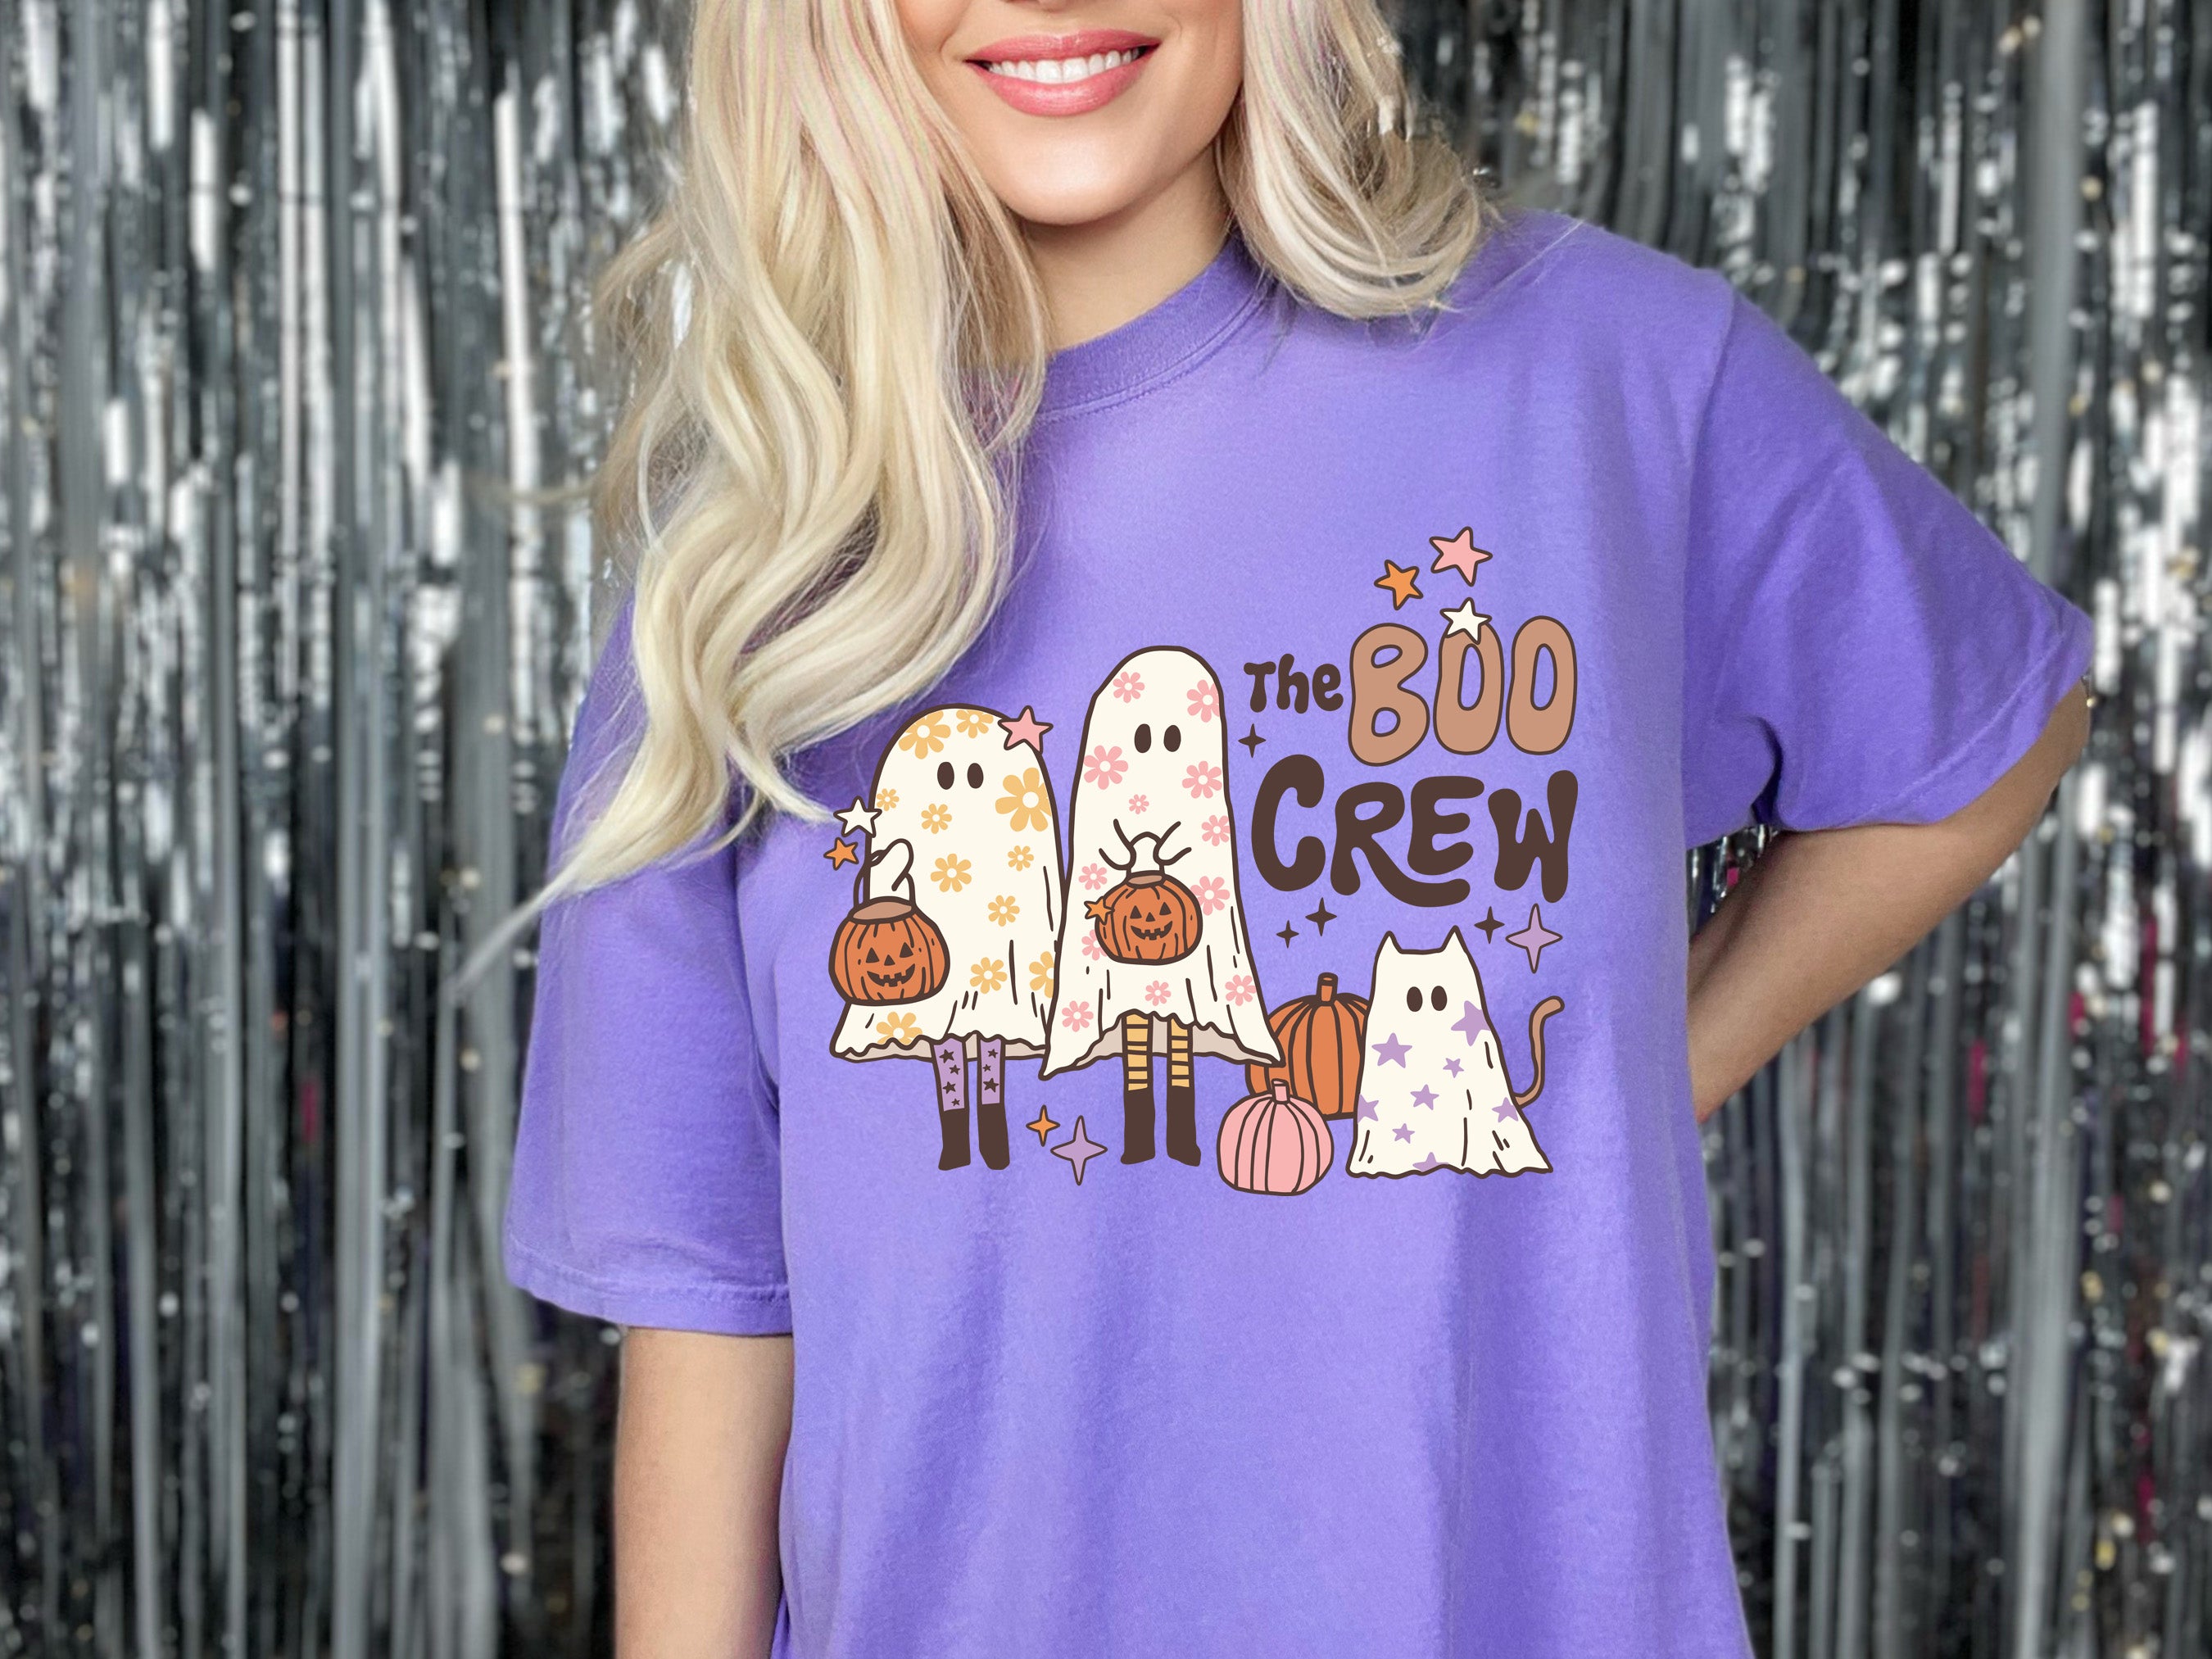 The Shirt Boo T Trendy Halloween Outpost Lifestyle Crew –